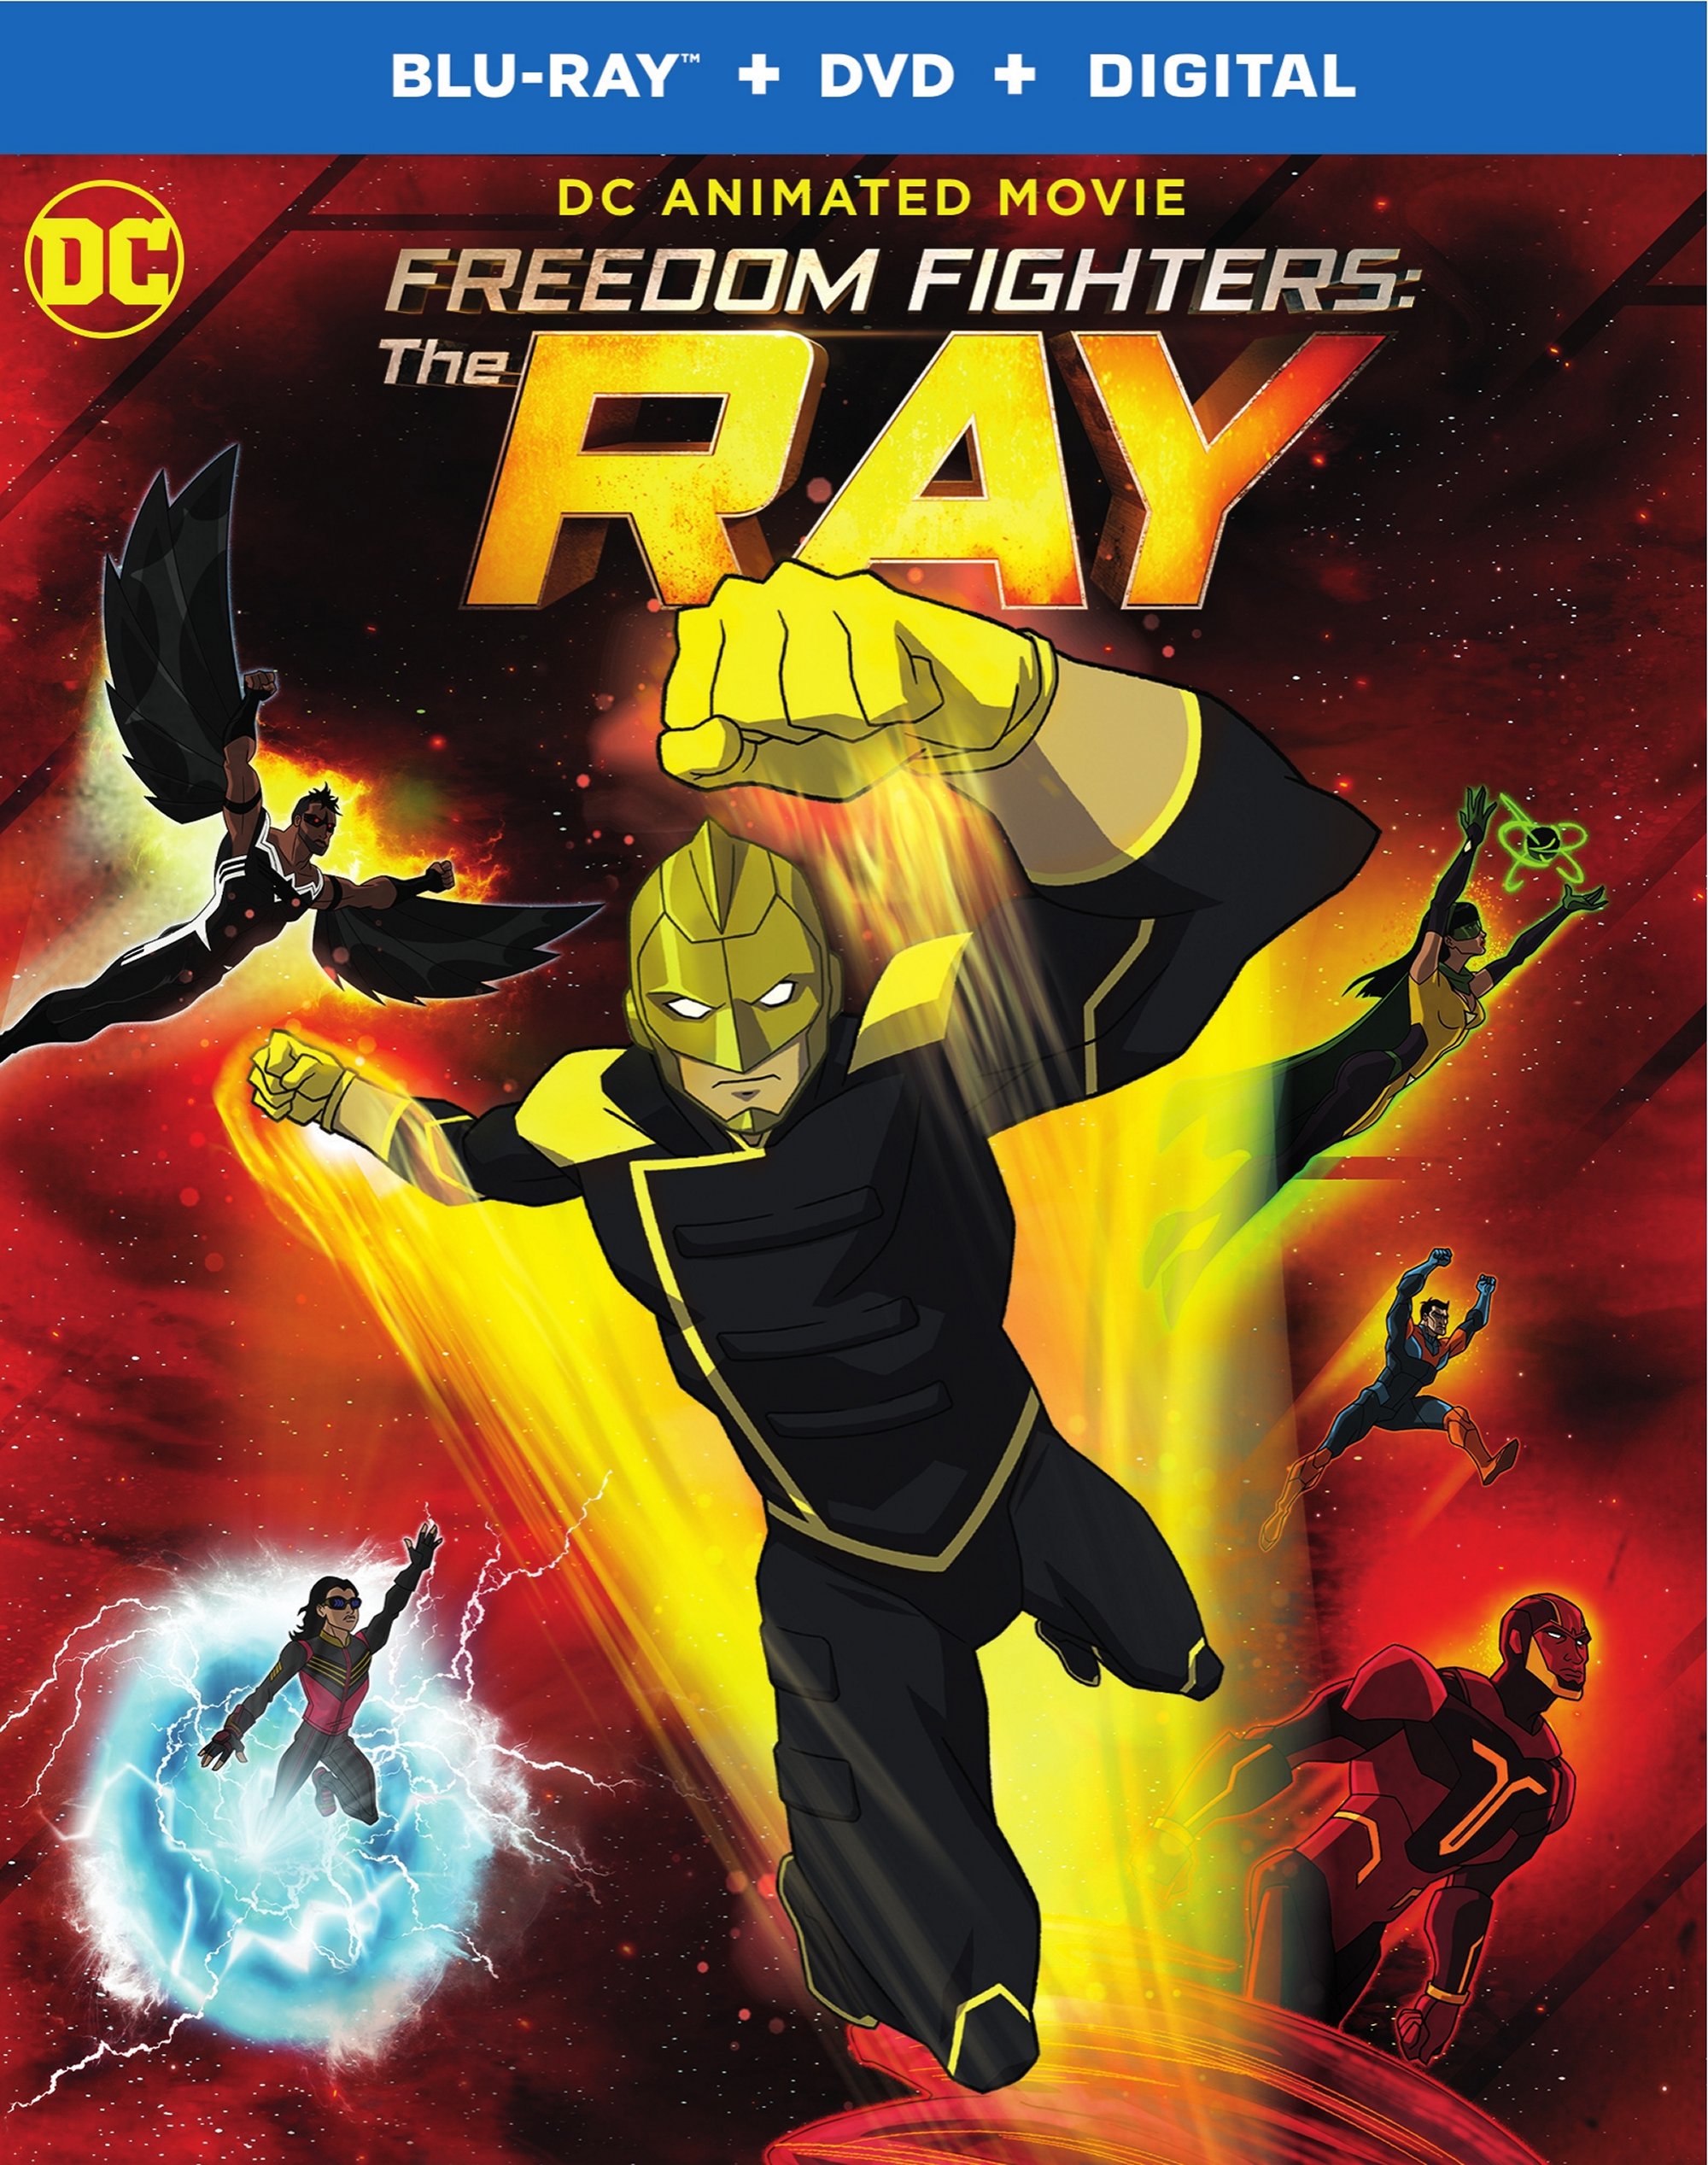 DC Freedom Fighters: The Ray [Blu-ray] [2017] - Best Buy